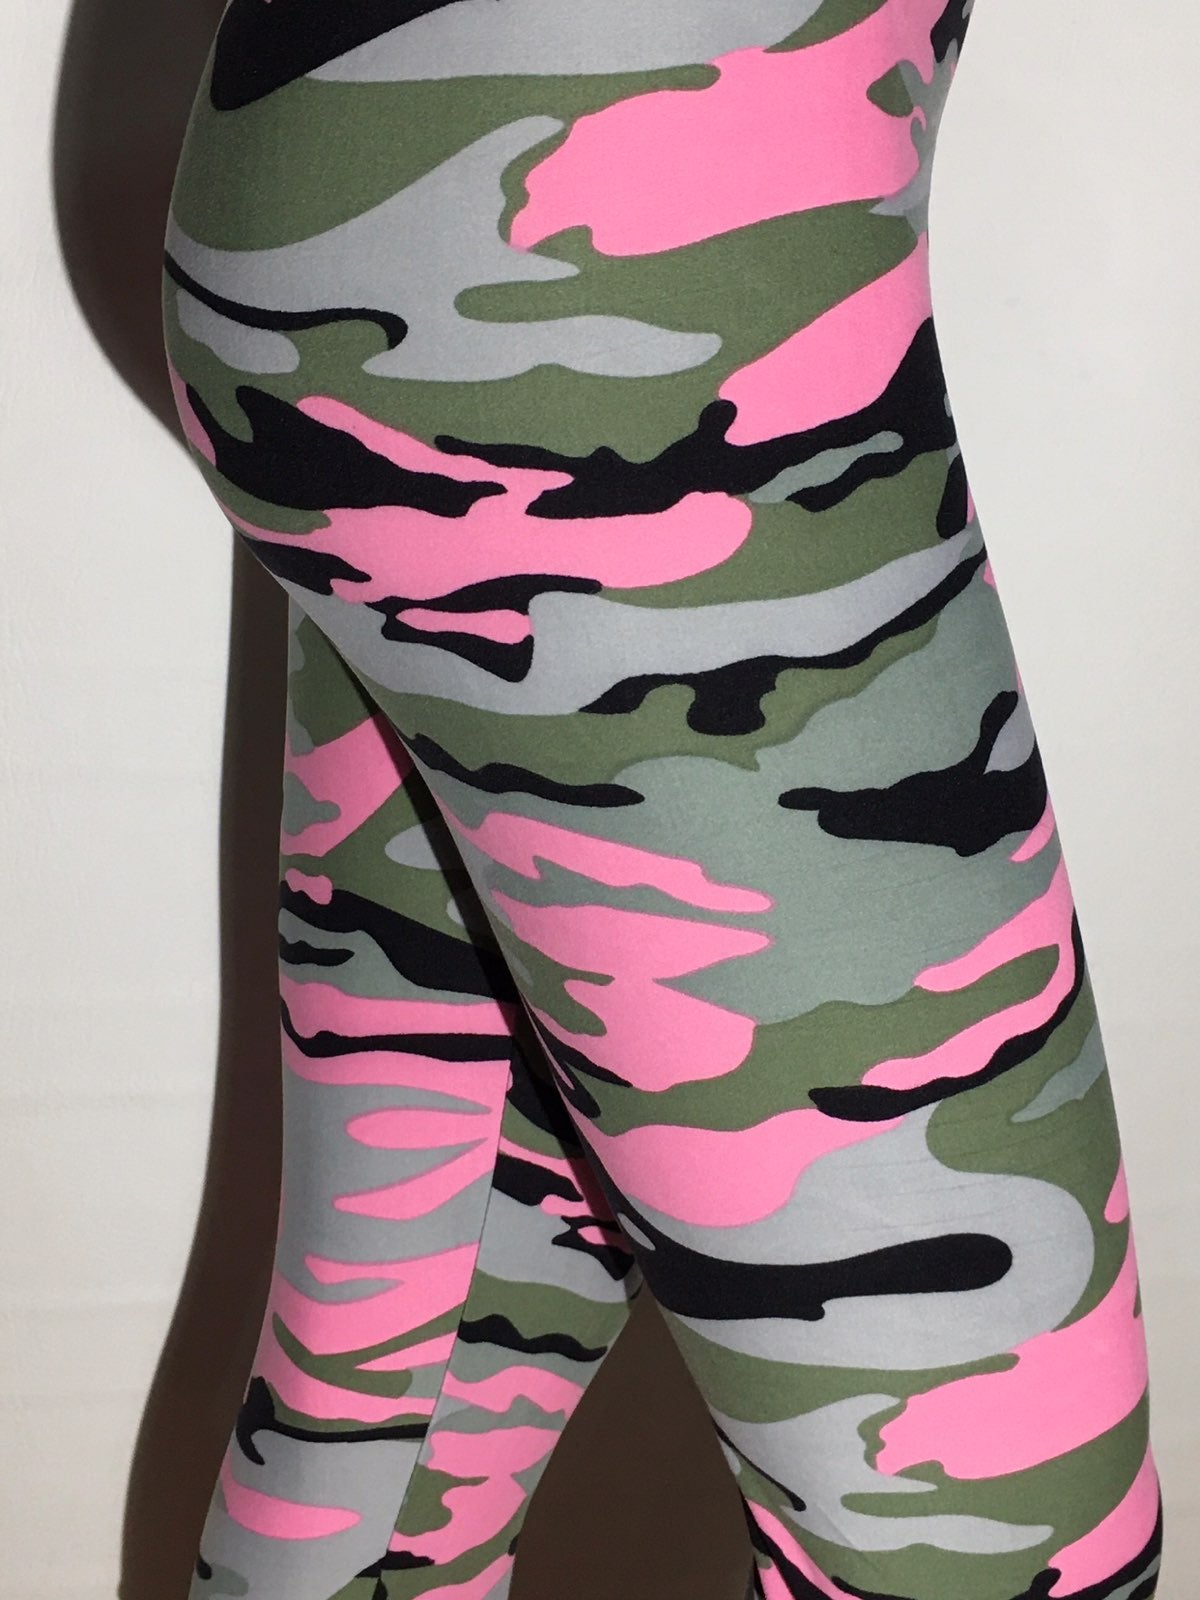 blush and camo pants outfit | Camo pants outfit, Outfits with leggings, Camo  outfits